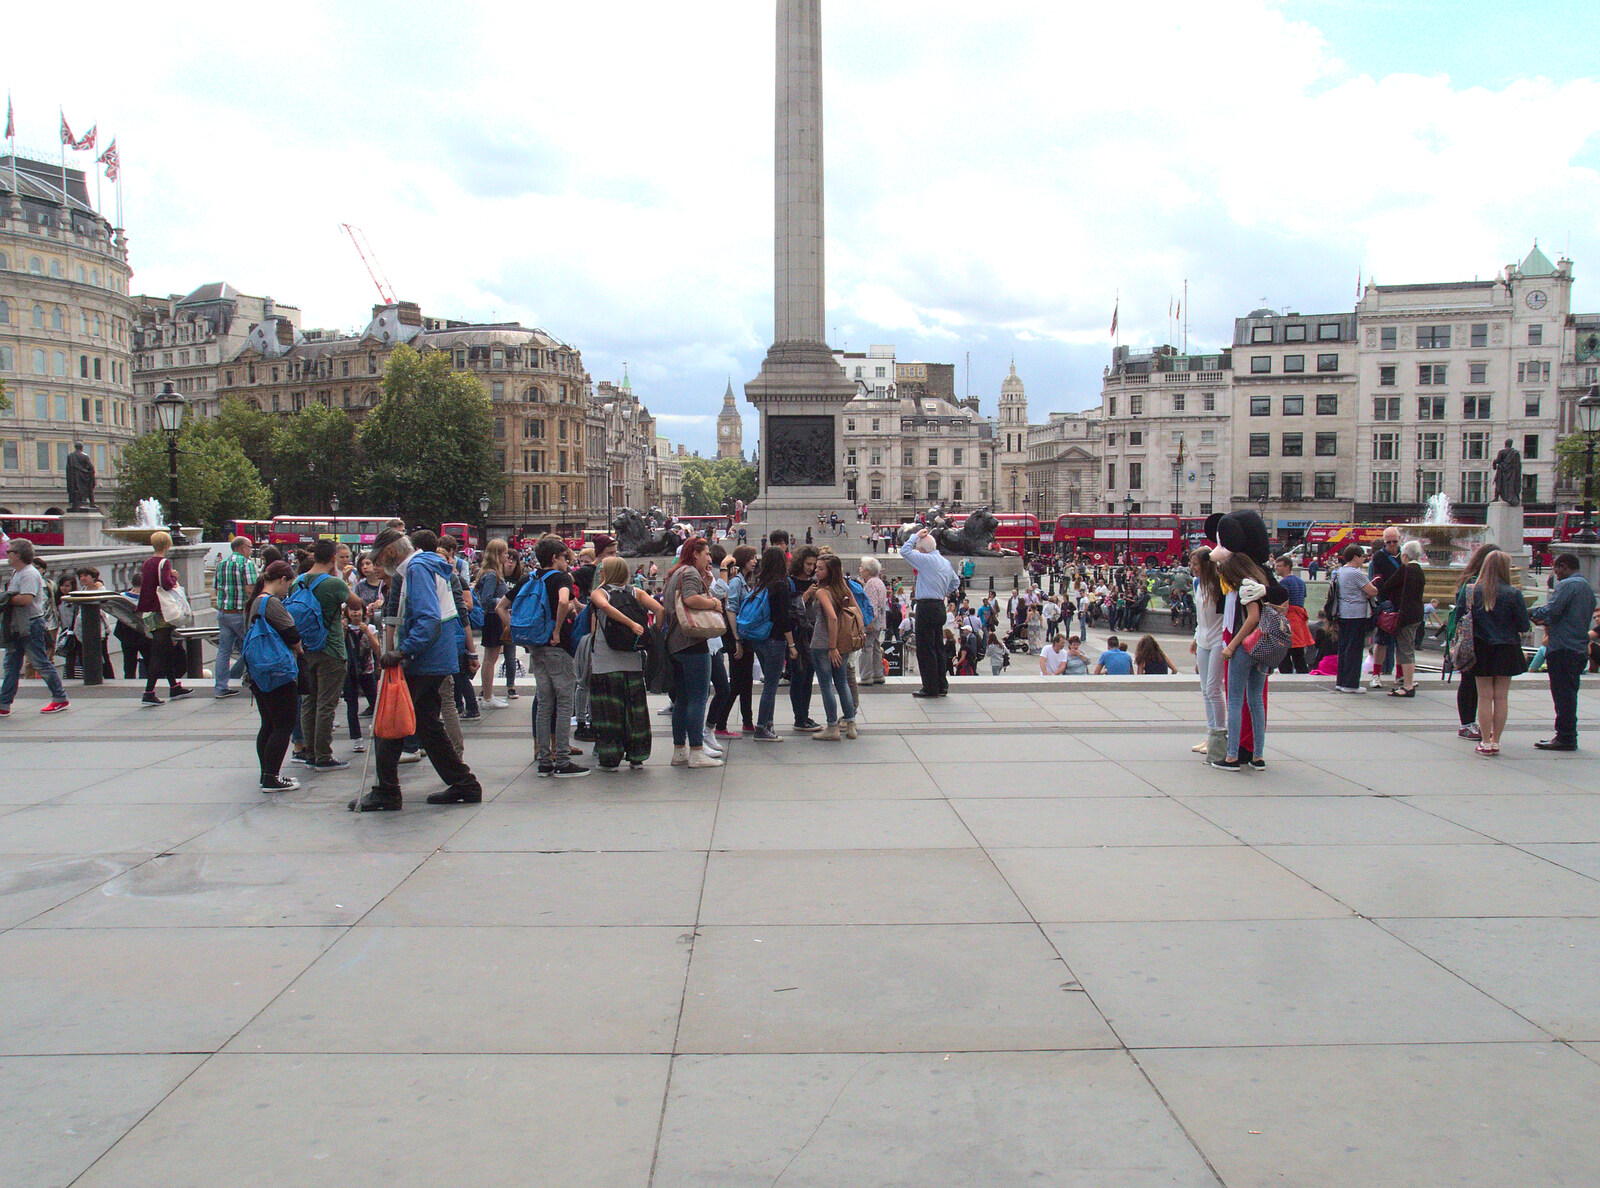 Back in Trafalgar Square from SwiftKey Innovation Day, and Pizza Pub, Westminster and Southwark - 14th August 2014